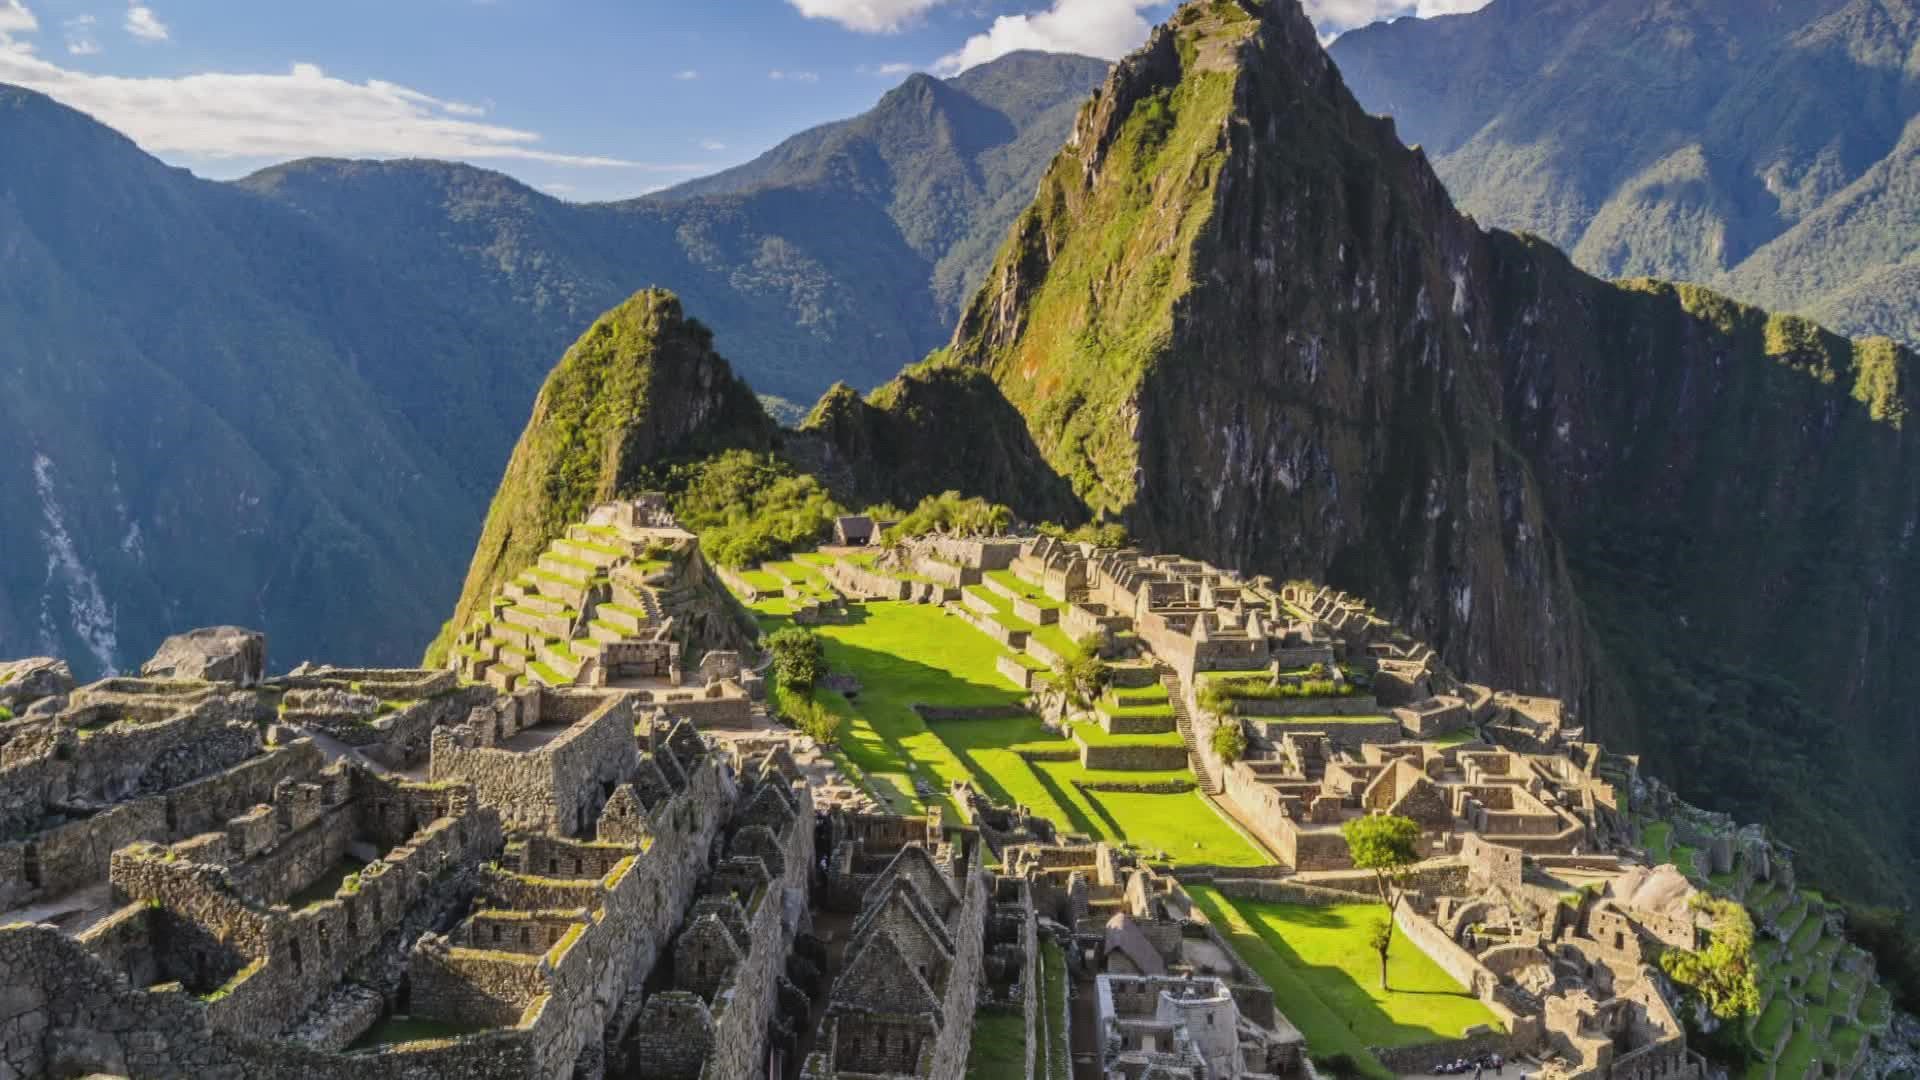 About 300 Americans, including a family from Maryville, are stuck in Machu Picchu, Peru. The country is currently in a state of emergency.